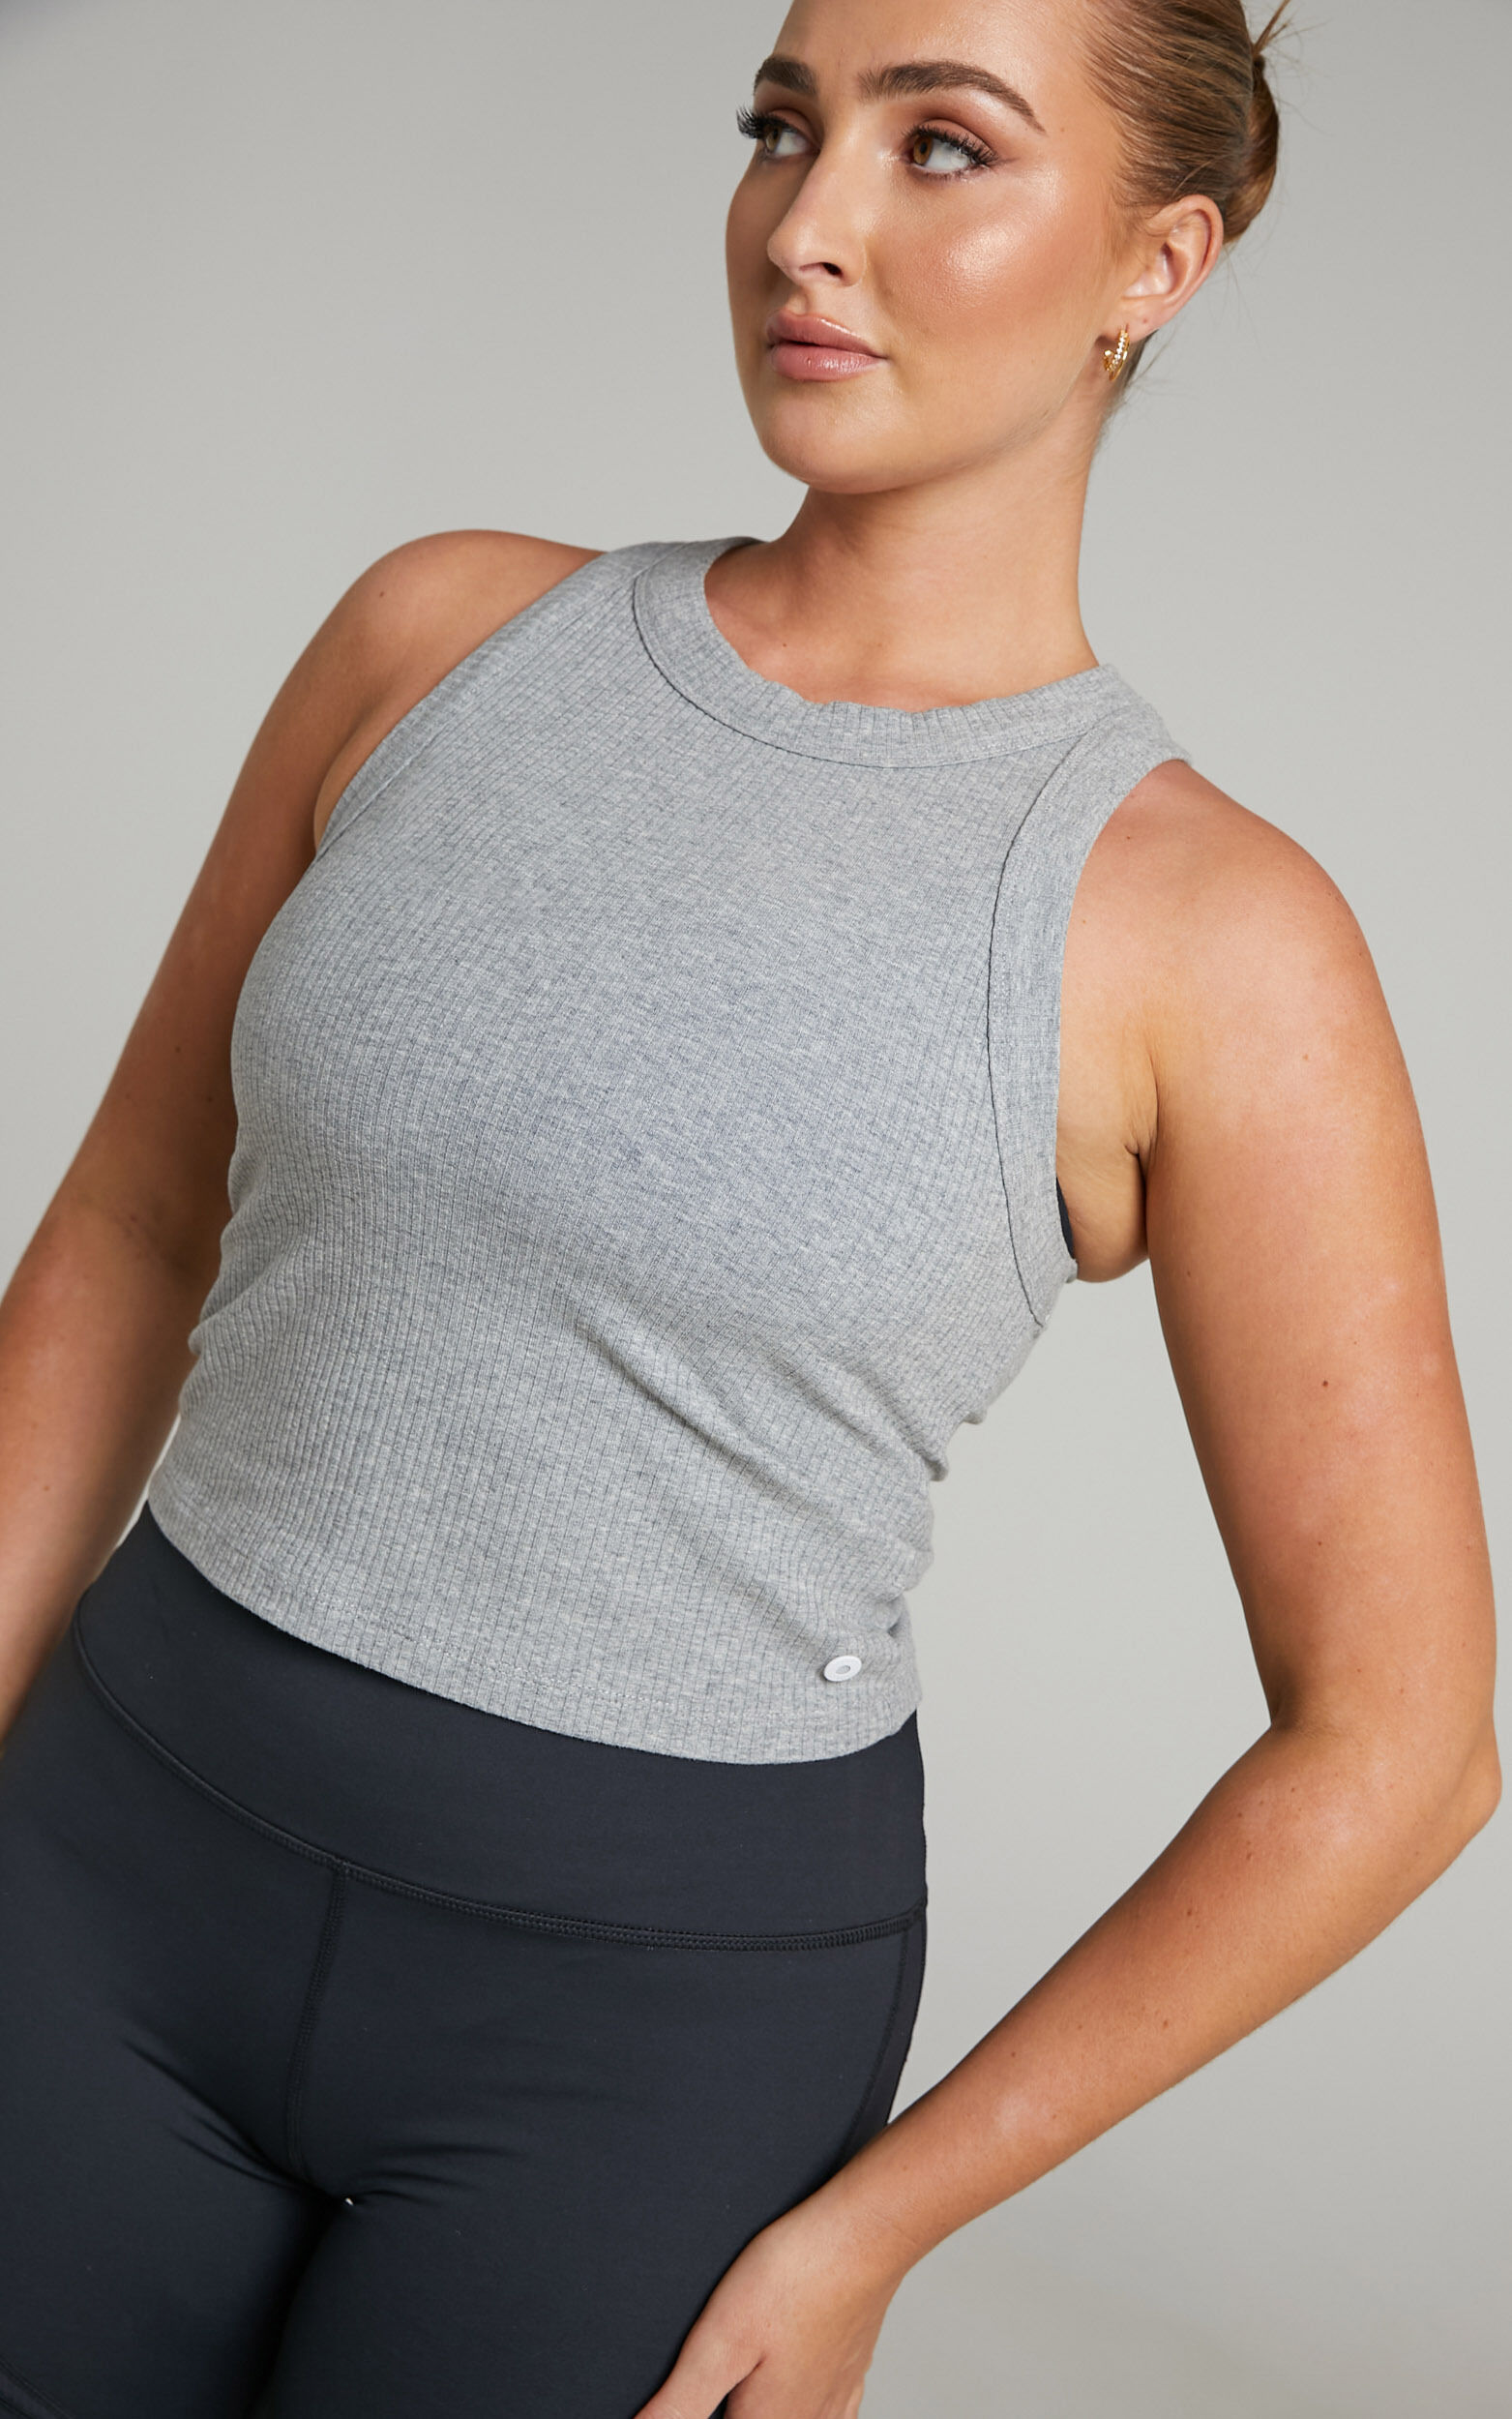 Lilybod - Harmony Top in Grey Marle Rib - L, GRY1, super-hi-res image number null